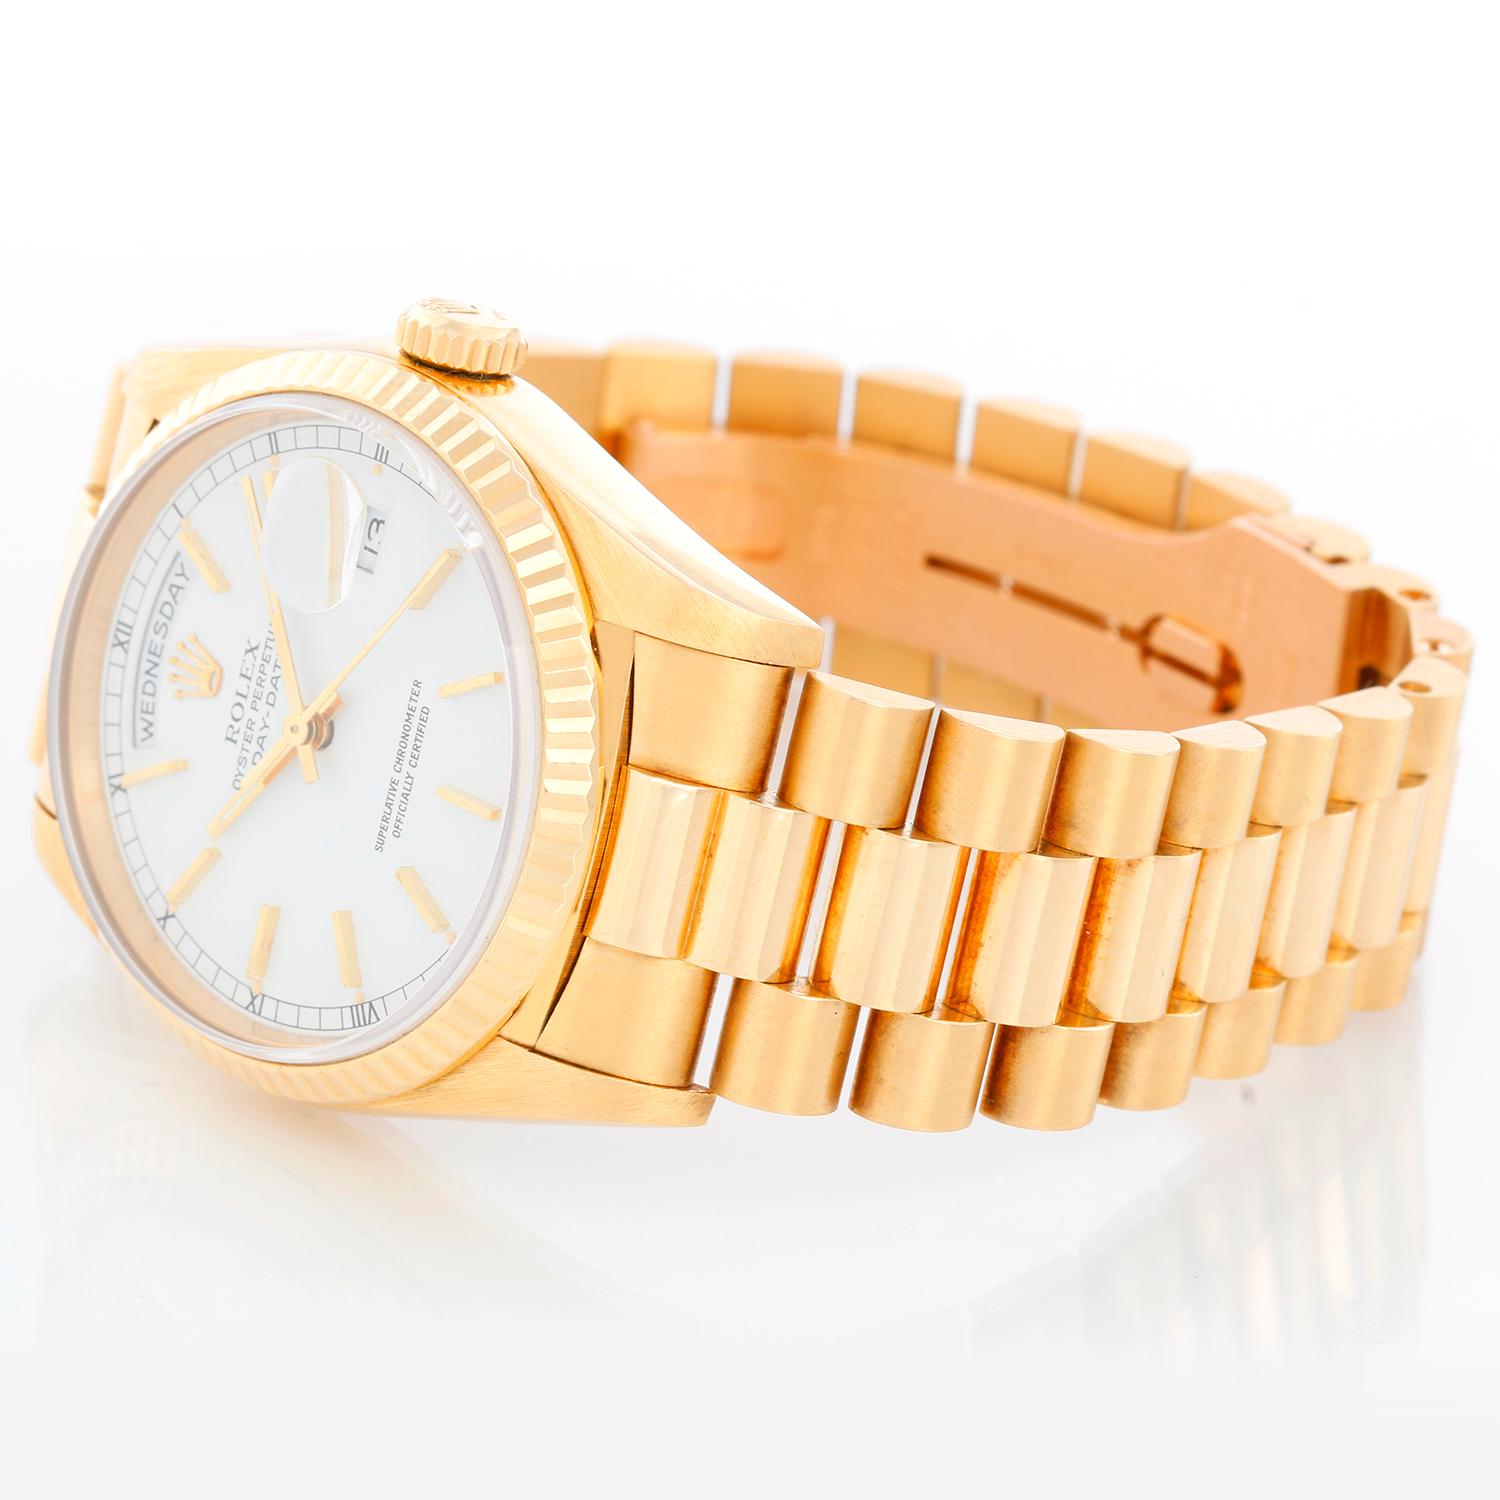 Men's Gold Rolex President Day-Date Watch 18238 - Automatic winding, 31 jewels, double Quickset, sapphire crystal. 18k yellow gold case and fluted bezel (36mm diameter). White dial with stick hour markers. 18k yellow gold President bracelet.